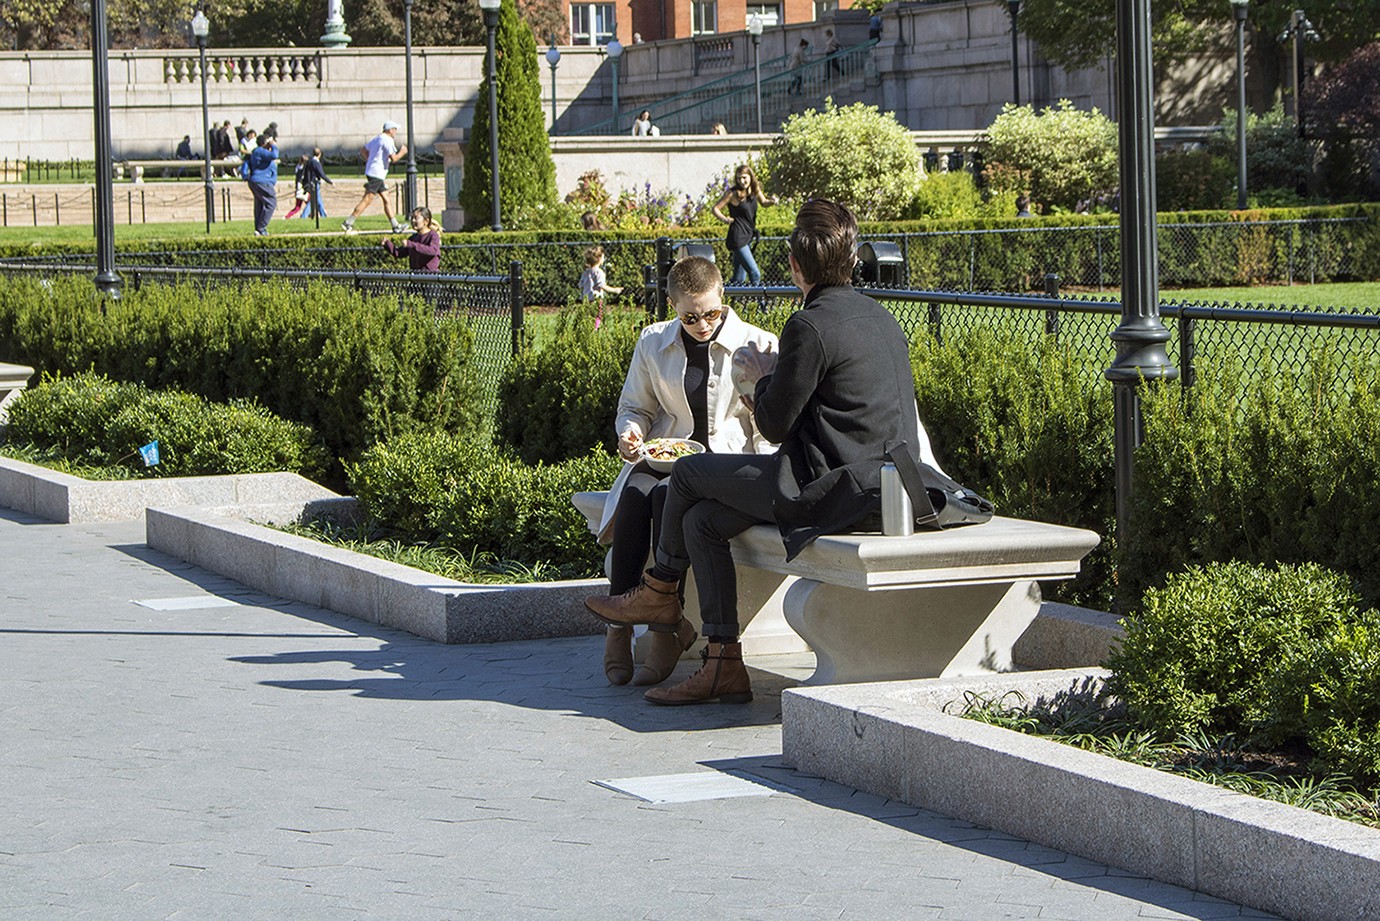 With unseasonably high temperatures for much of the fall, the new plaza and lawn proved a popular spot for the Columbia community as soon as it opened. Students enjoying lunch on one of the eight new benches along the perimeter of Butler Lawn.